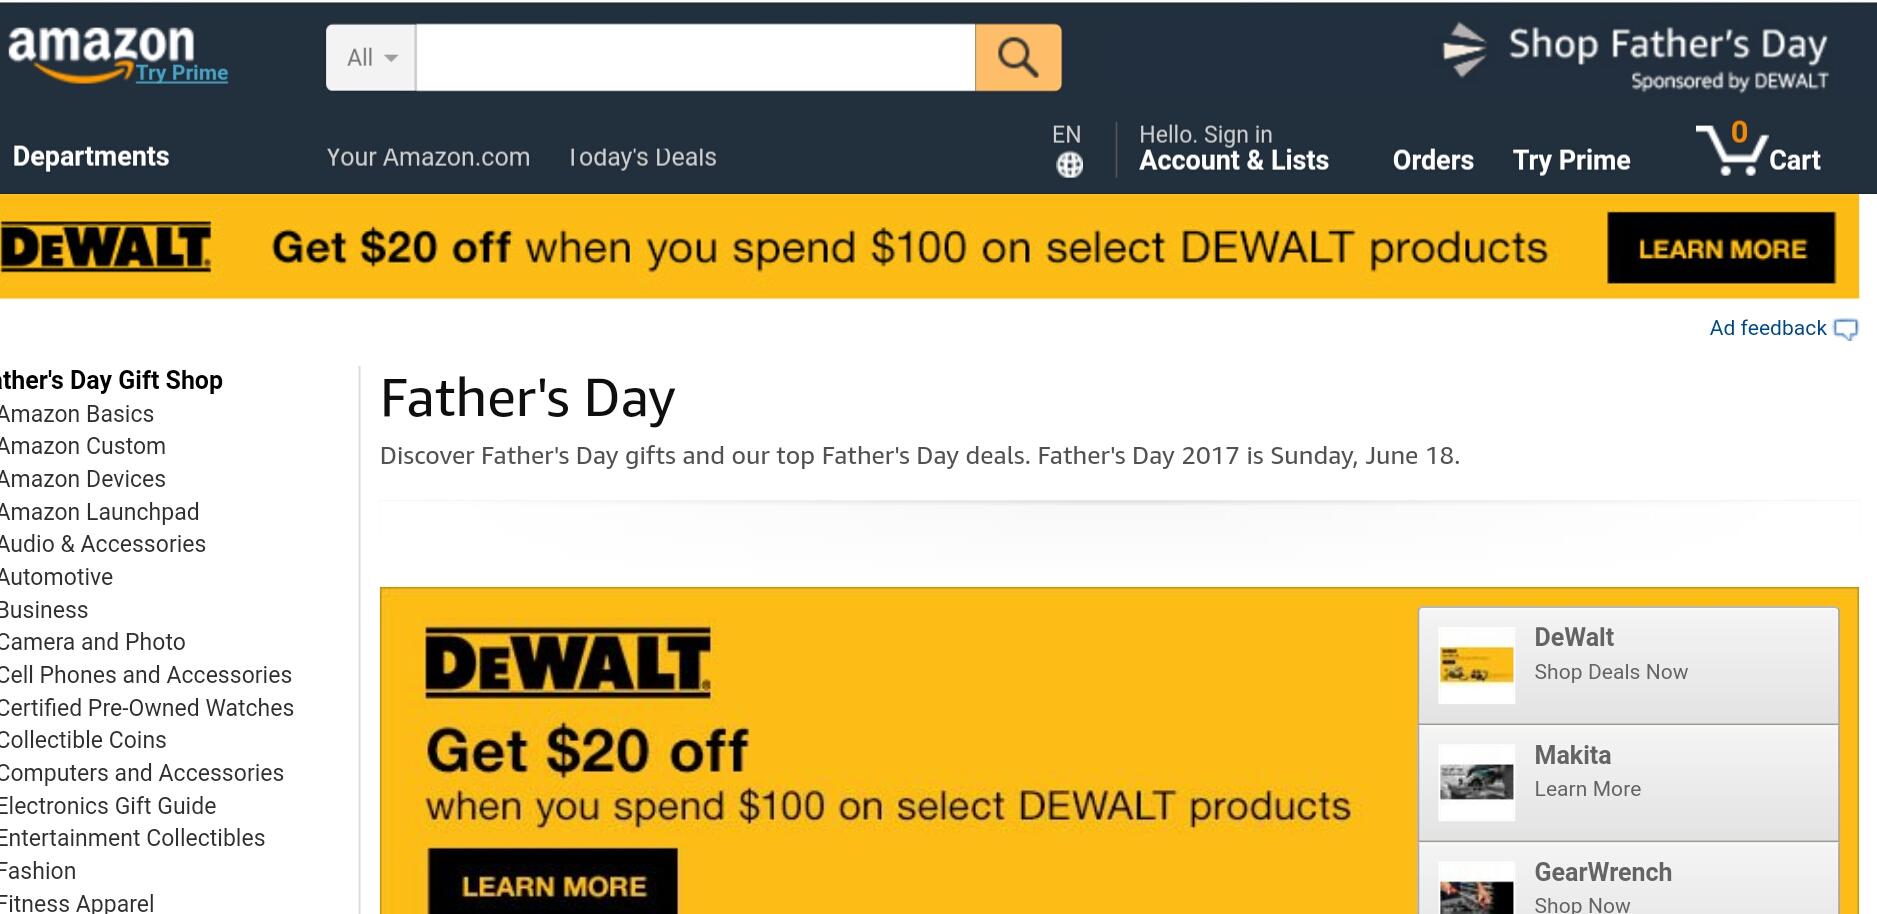 Deal Alert: Amazon cuts off prices for Alexa and Kindle devices ahead of Father's Day 1